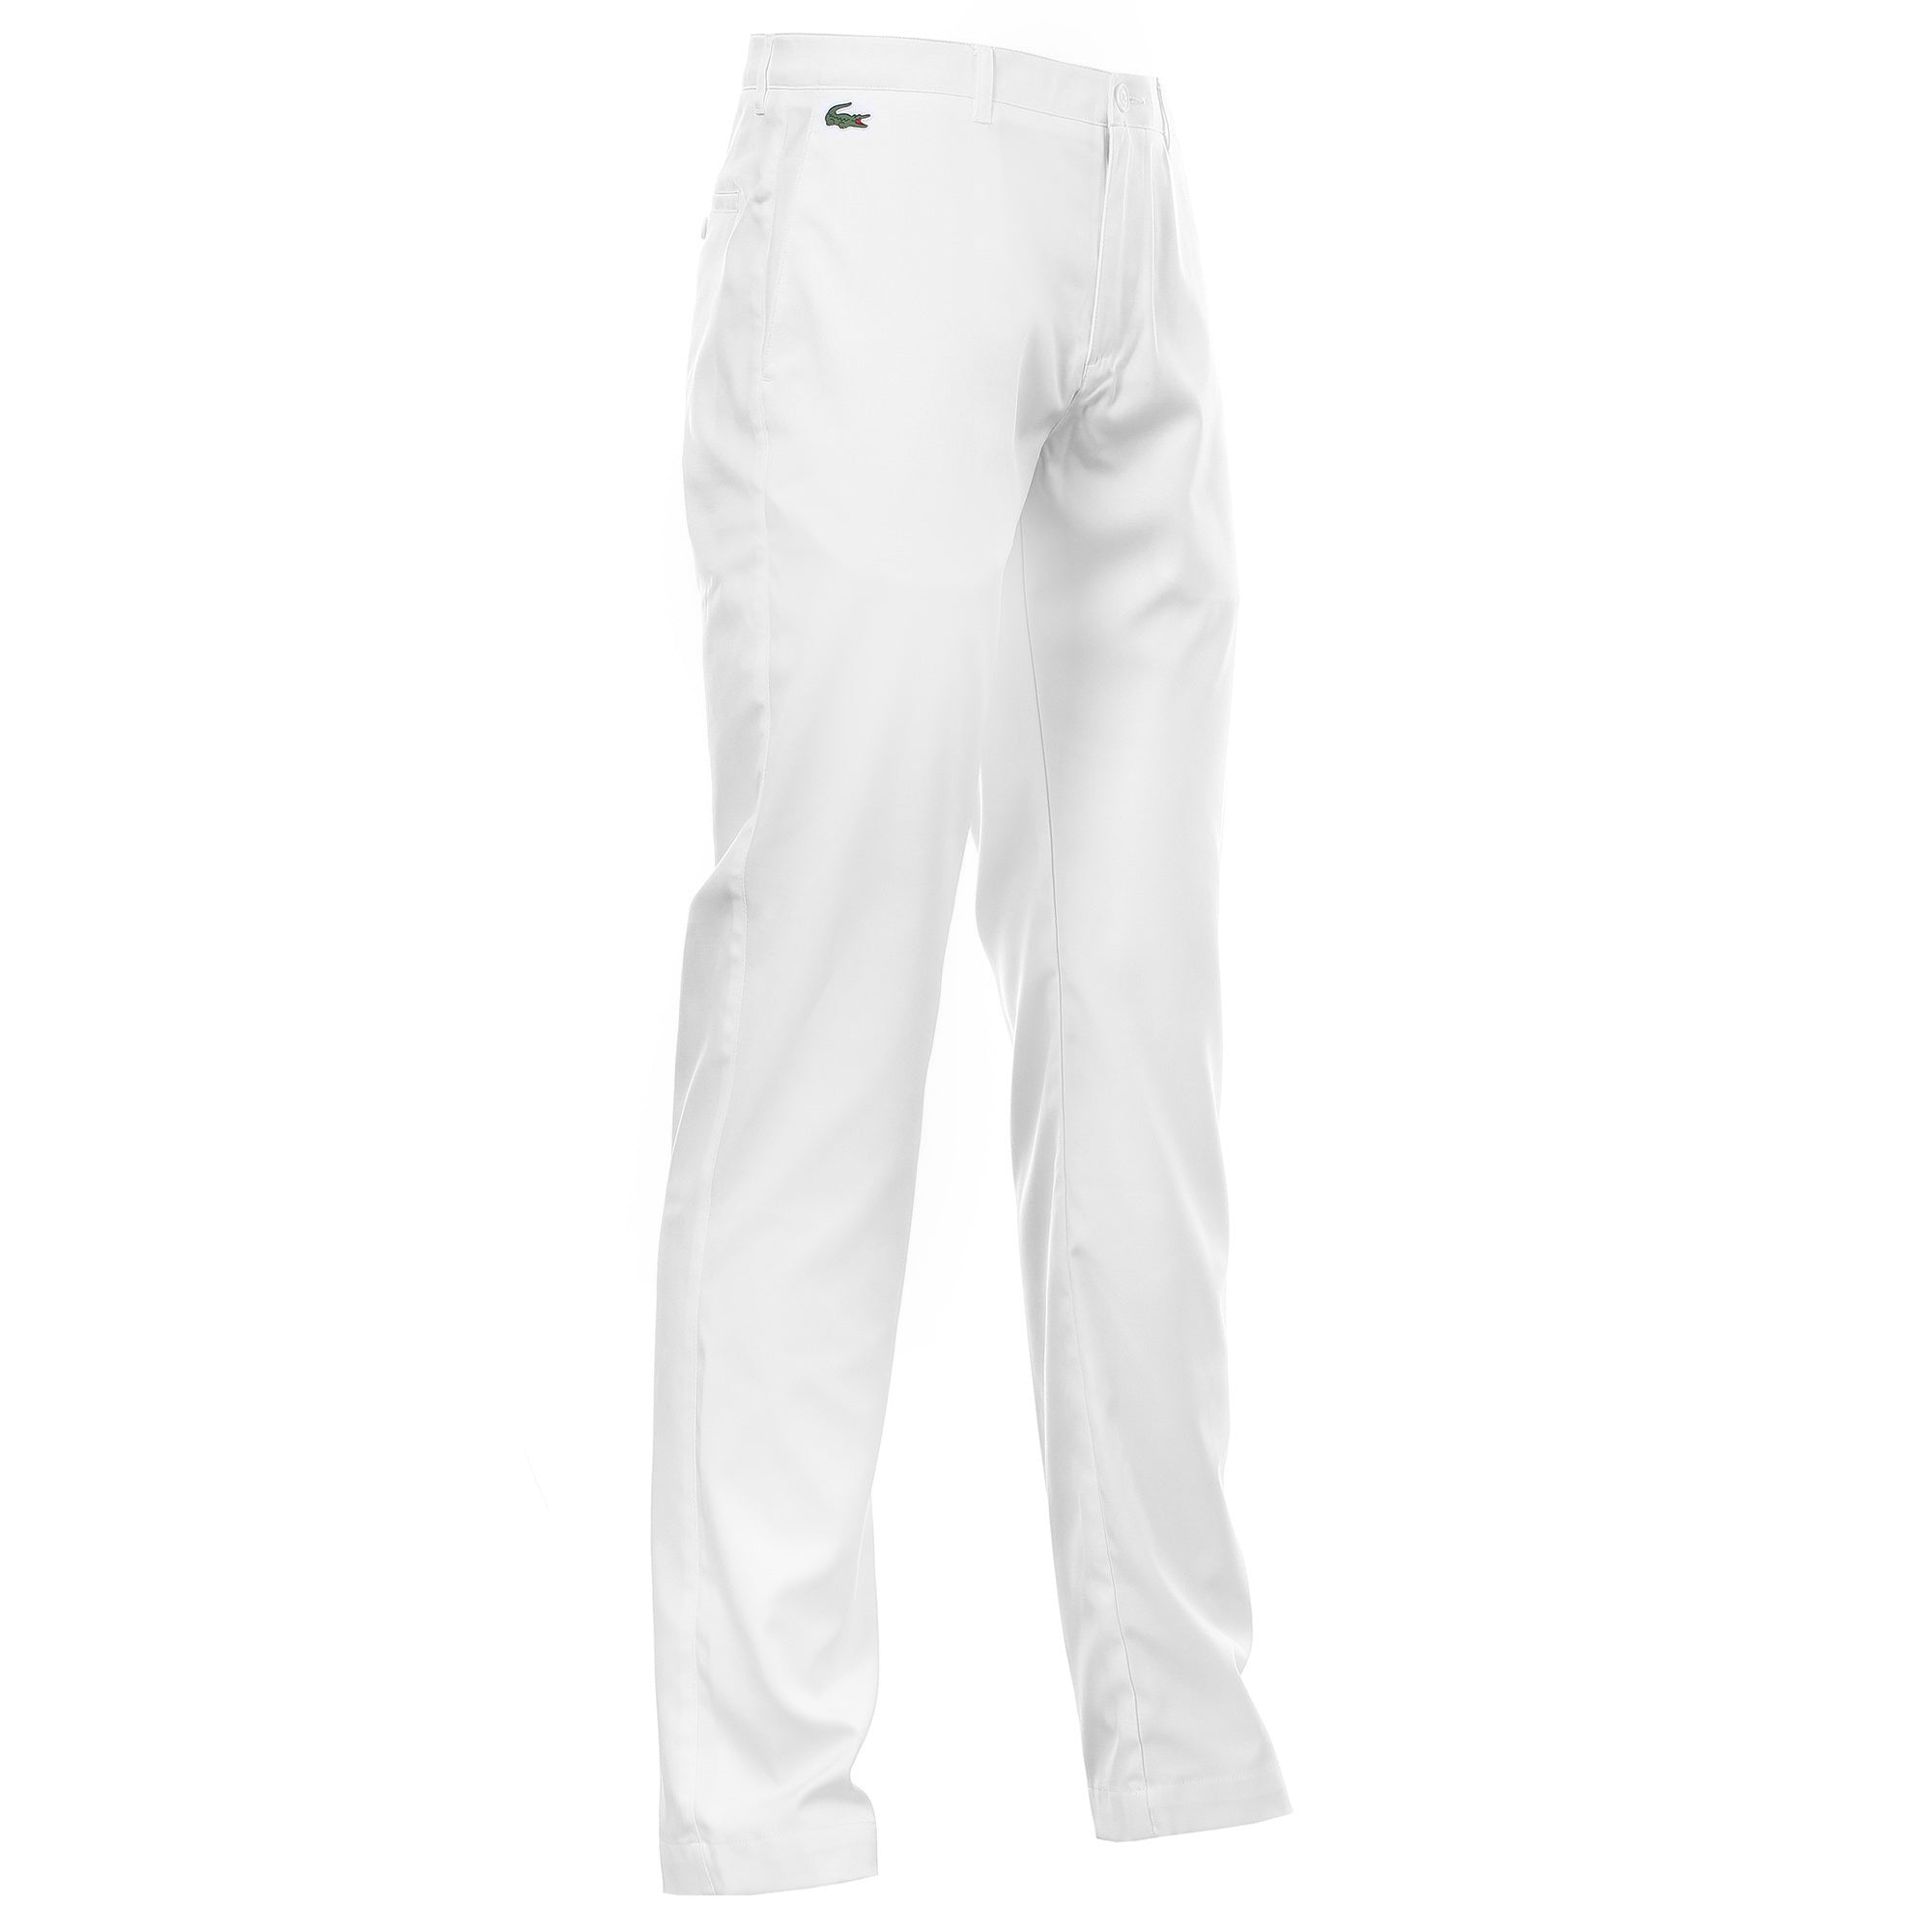 lacoste-technical-chino-pant-hh9528-cw-white